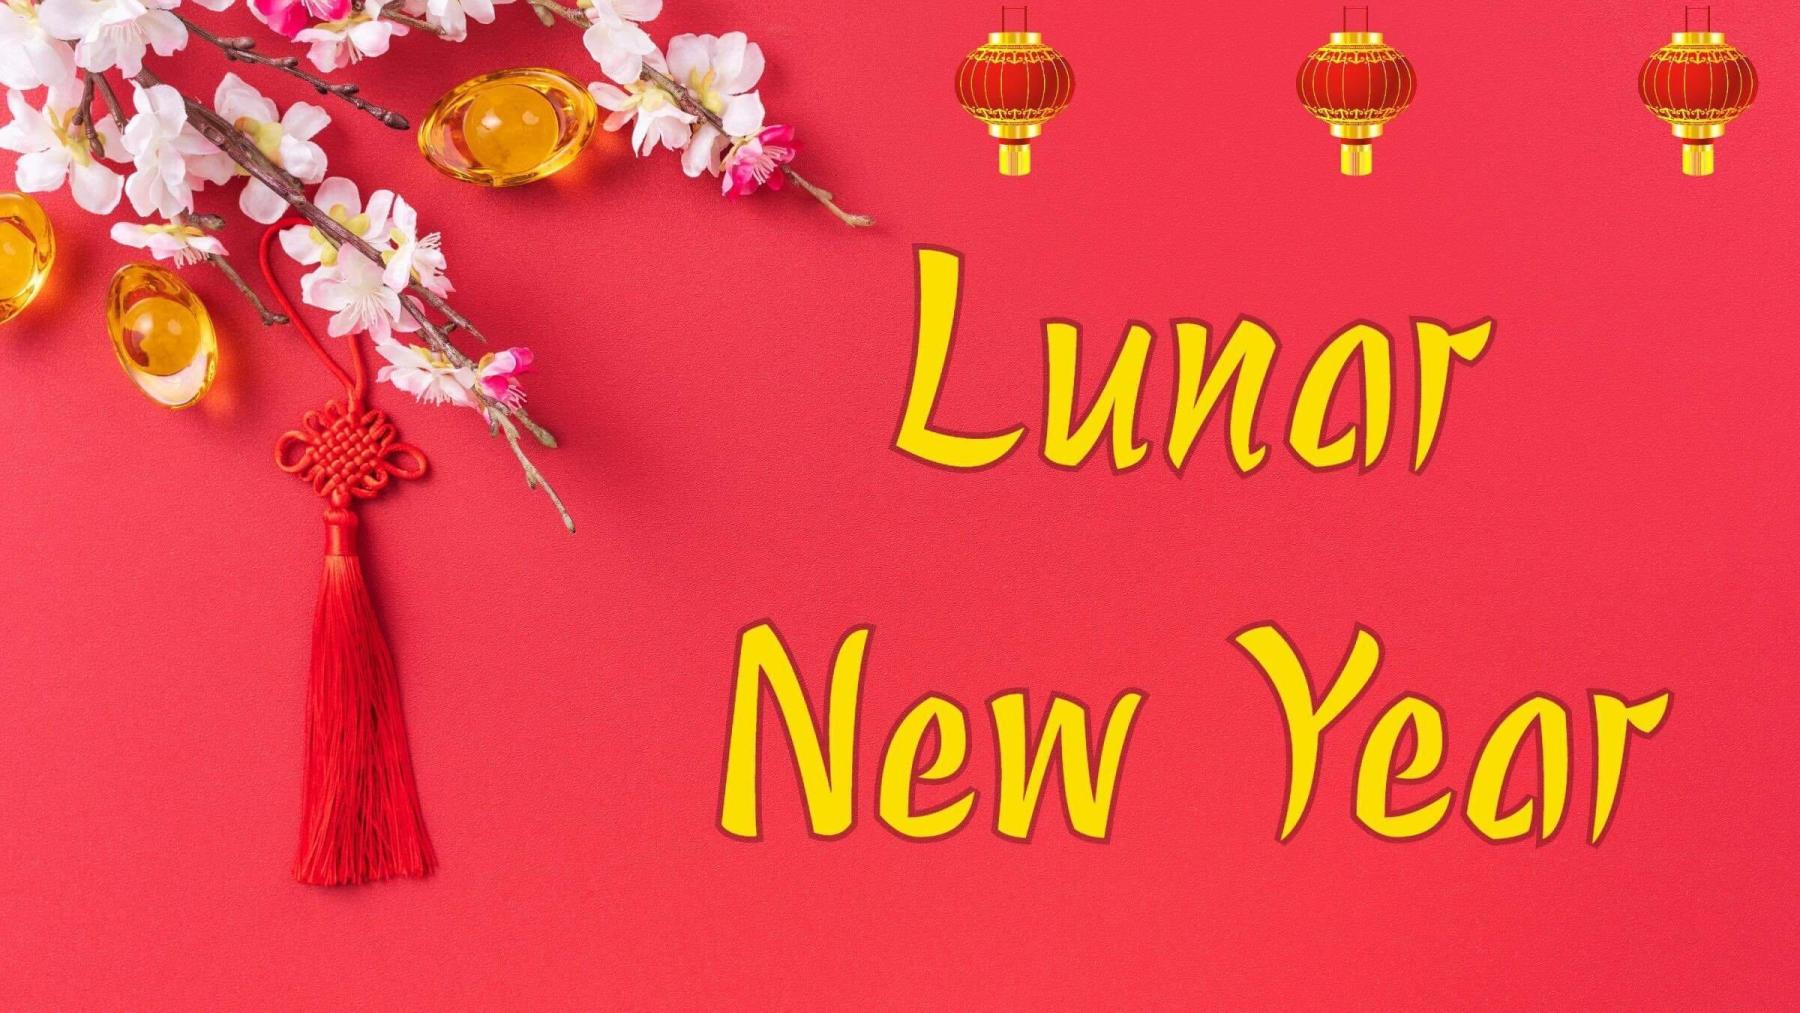 Lunar New Year banner with red background, cherry blossoms and red lanterns.